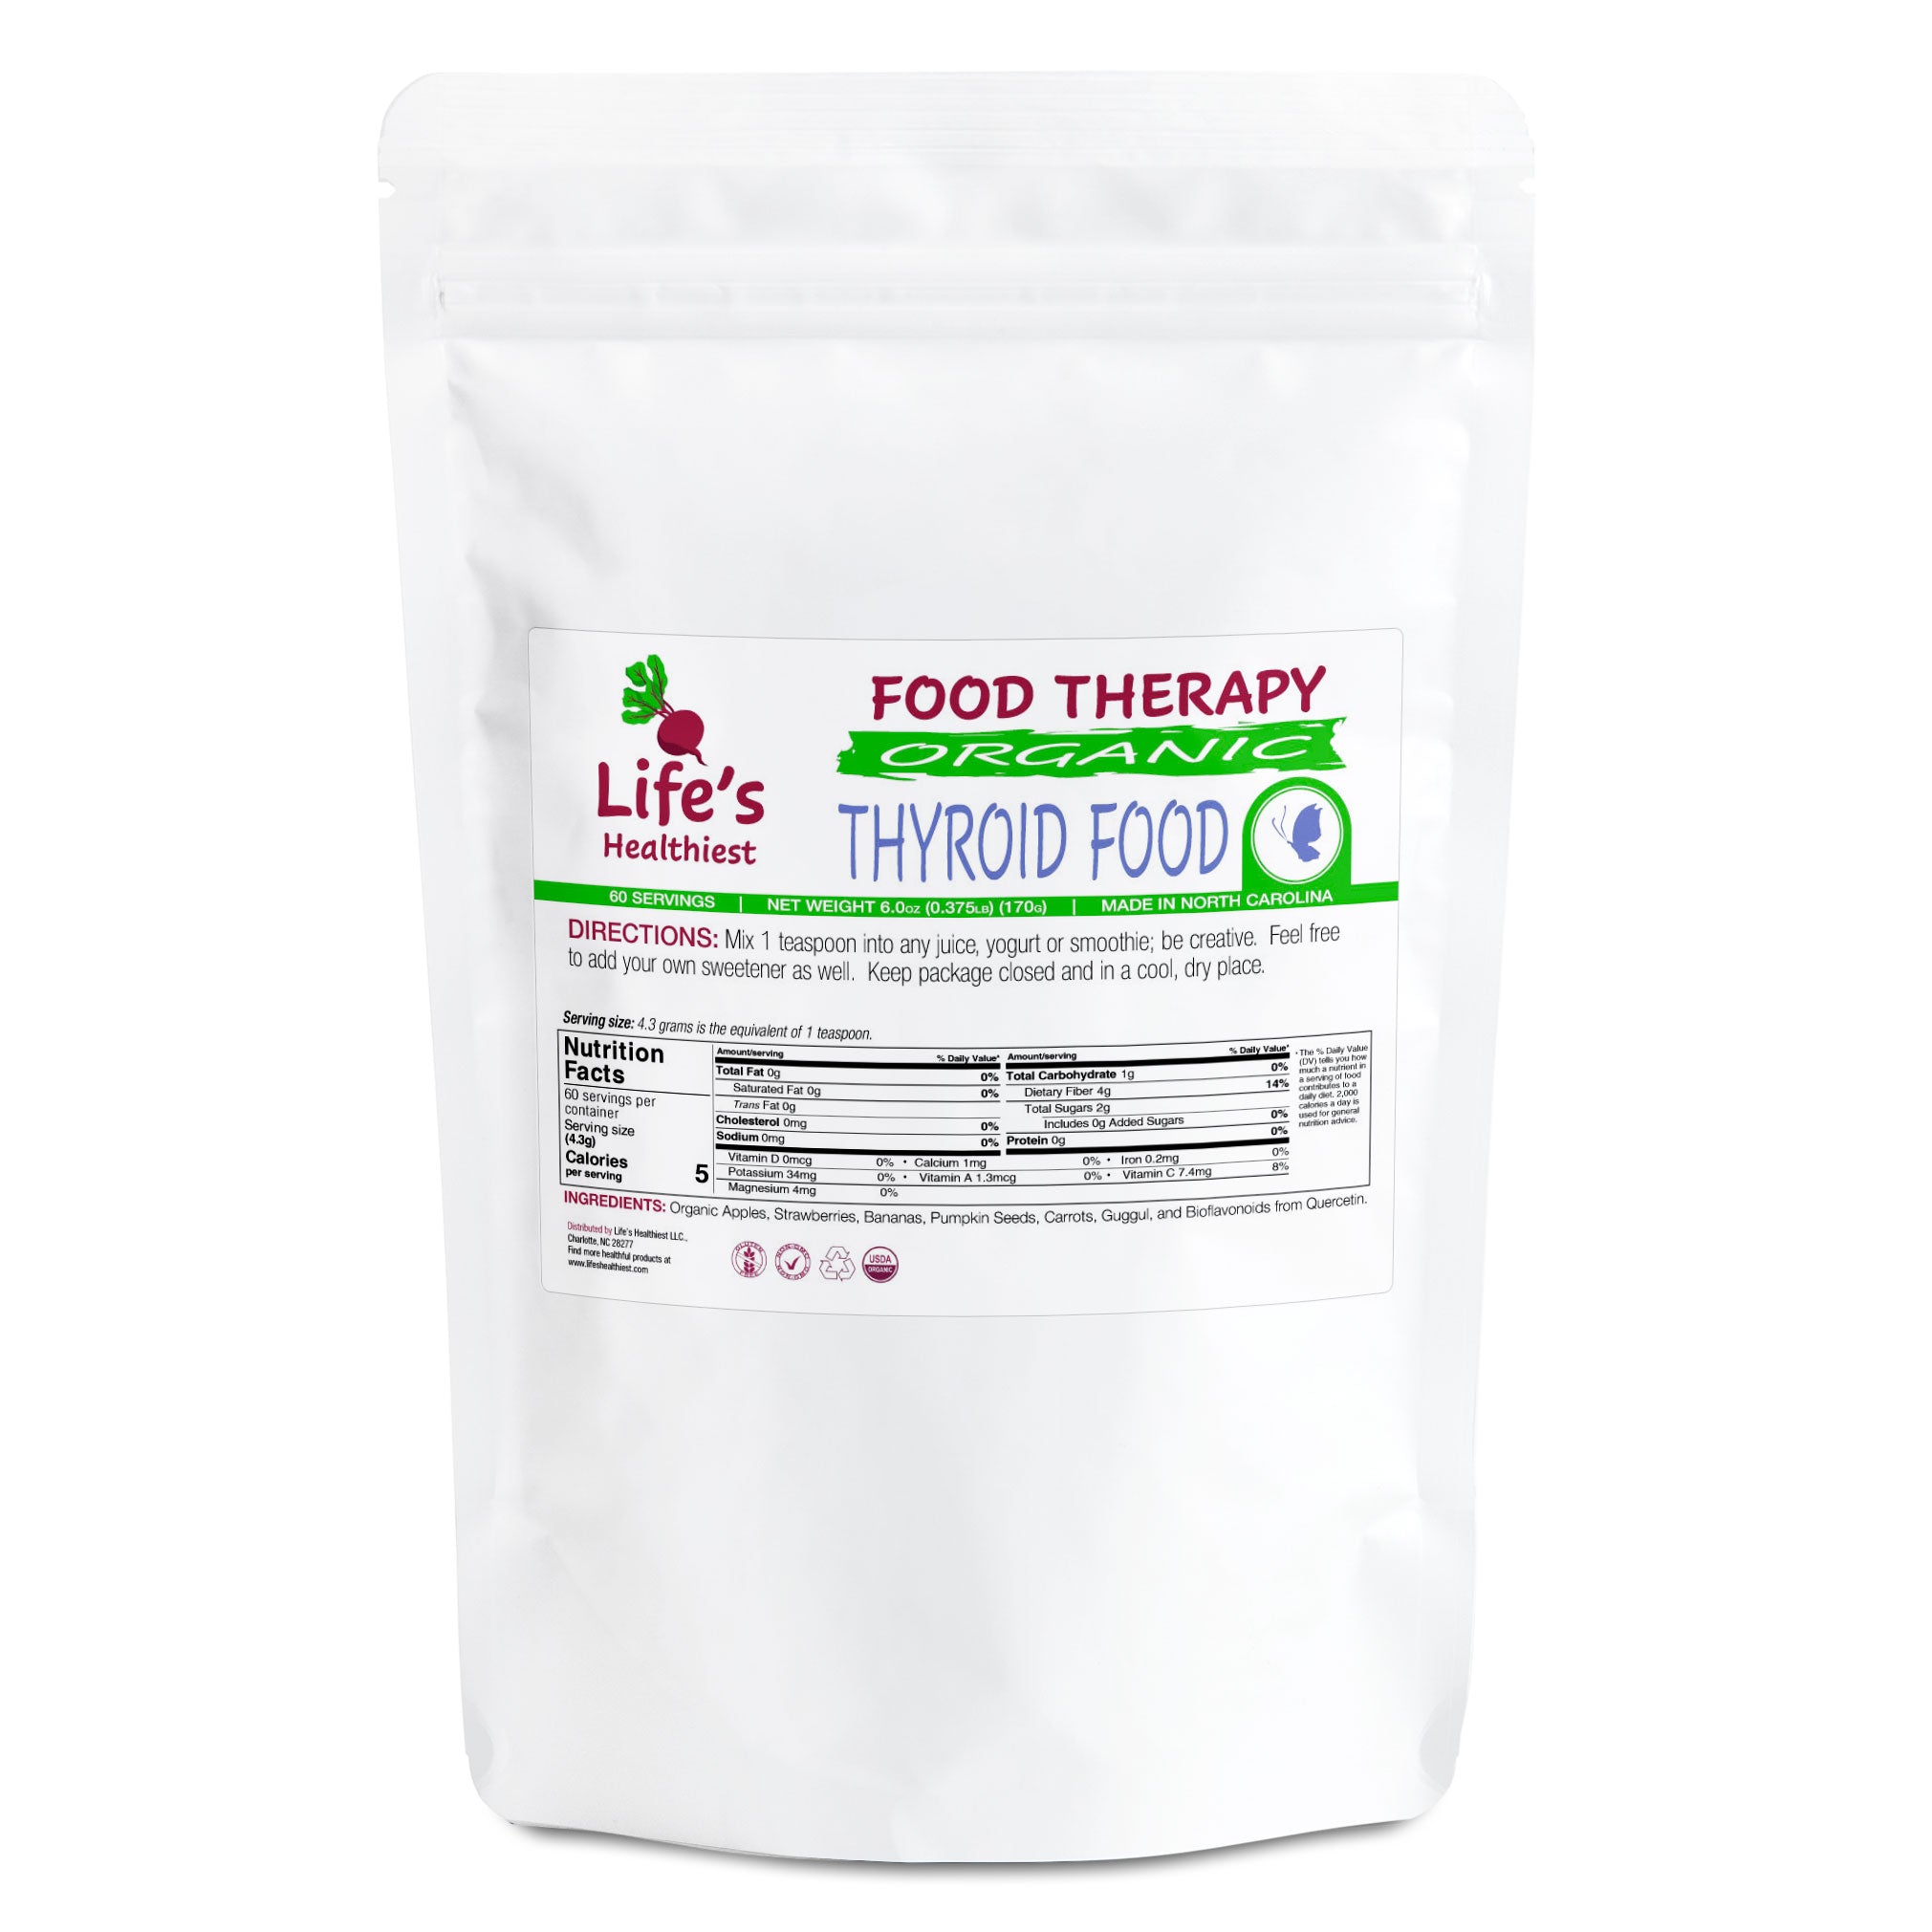 Life's Healthiest THYROID FOOD Whole Food Nutritional Therapy 6.0 oz